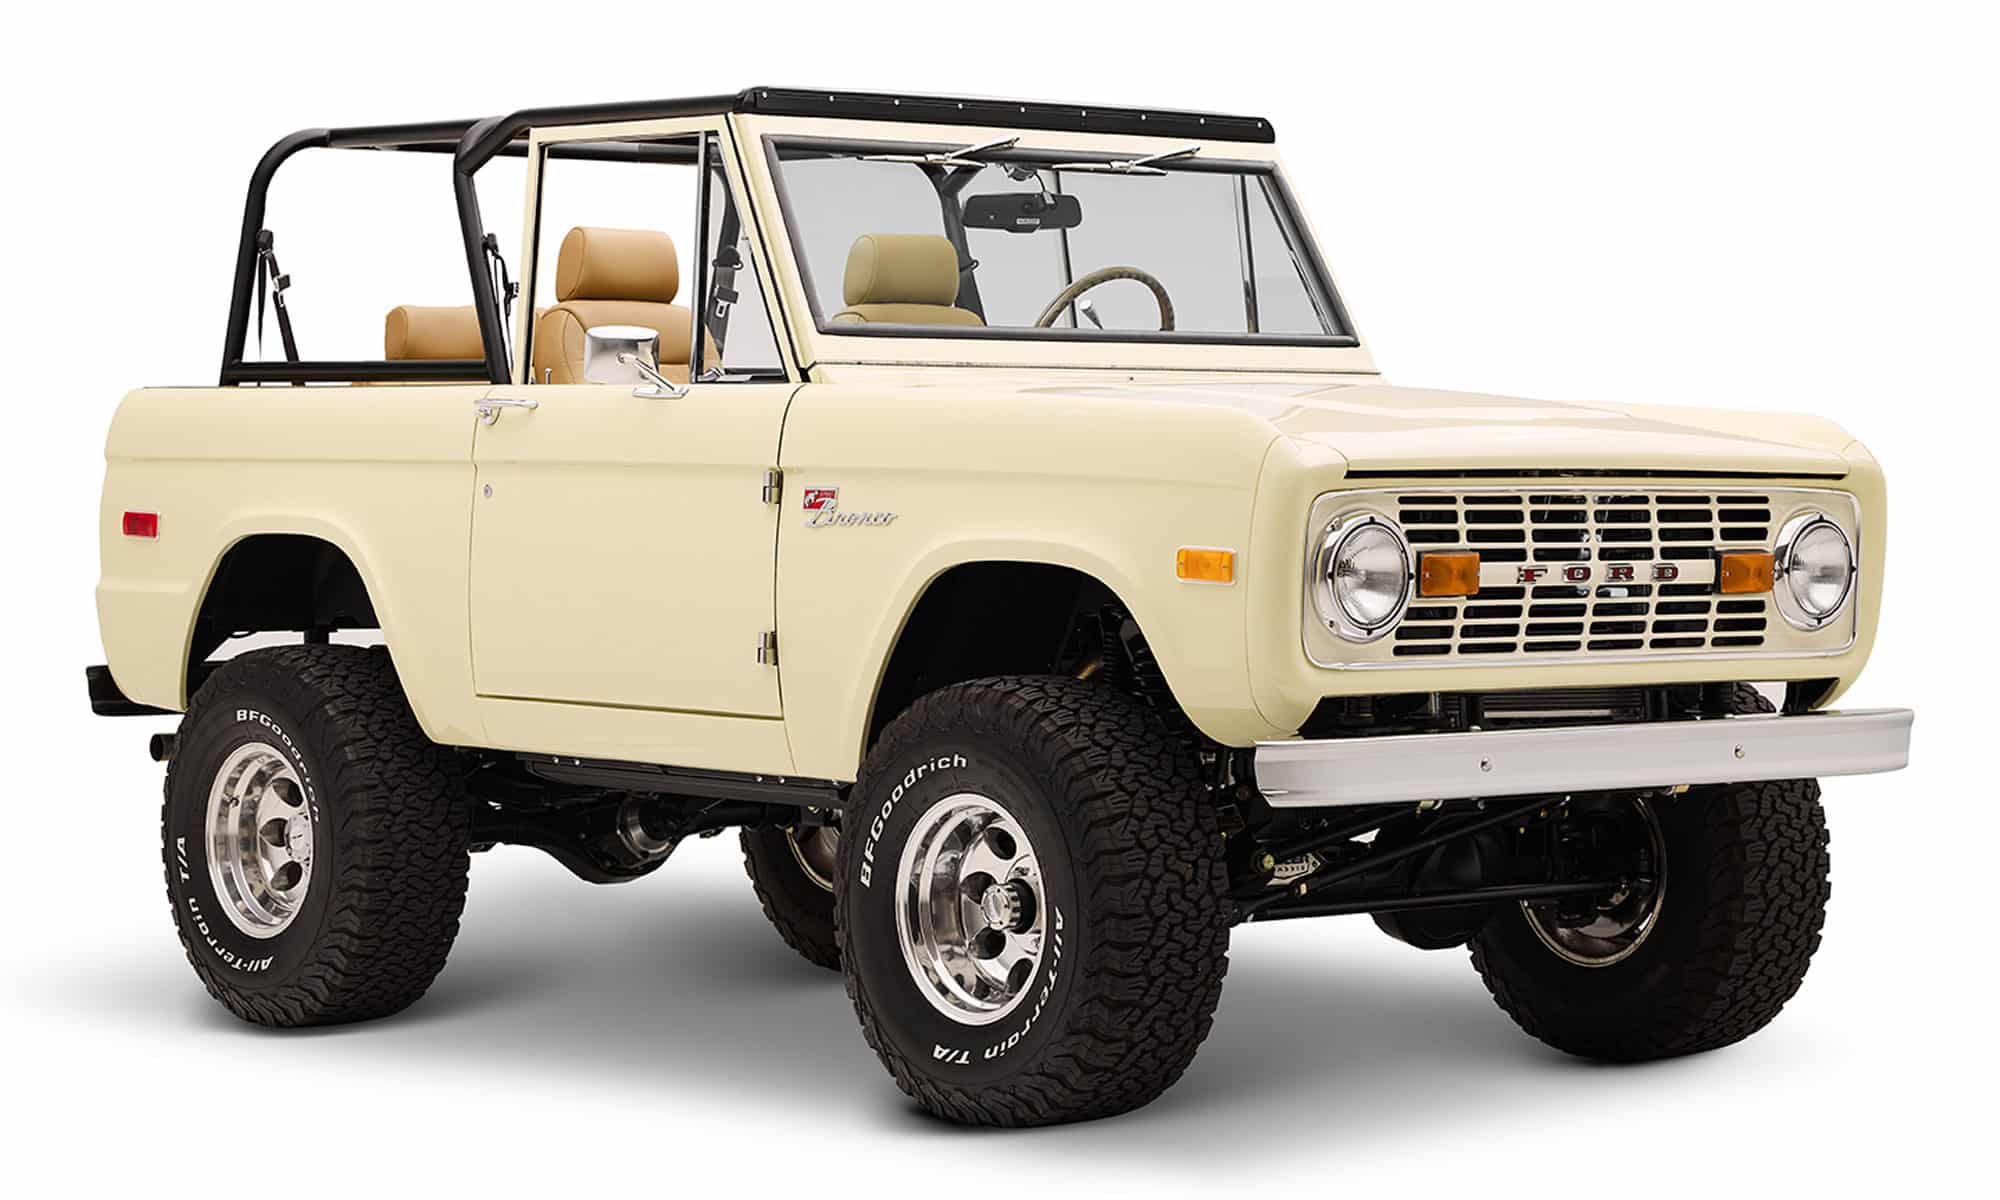 Build A Bronco - 7 Exclusive Reasons to Build a Ford Bronco